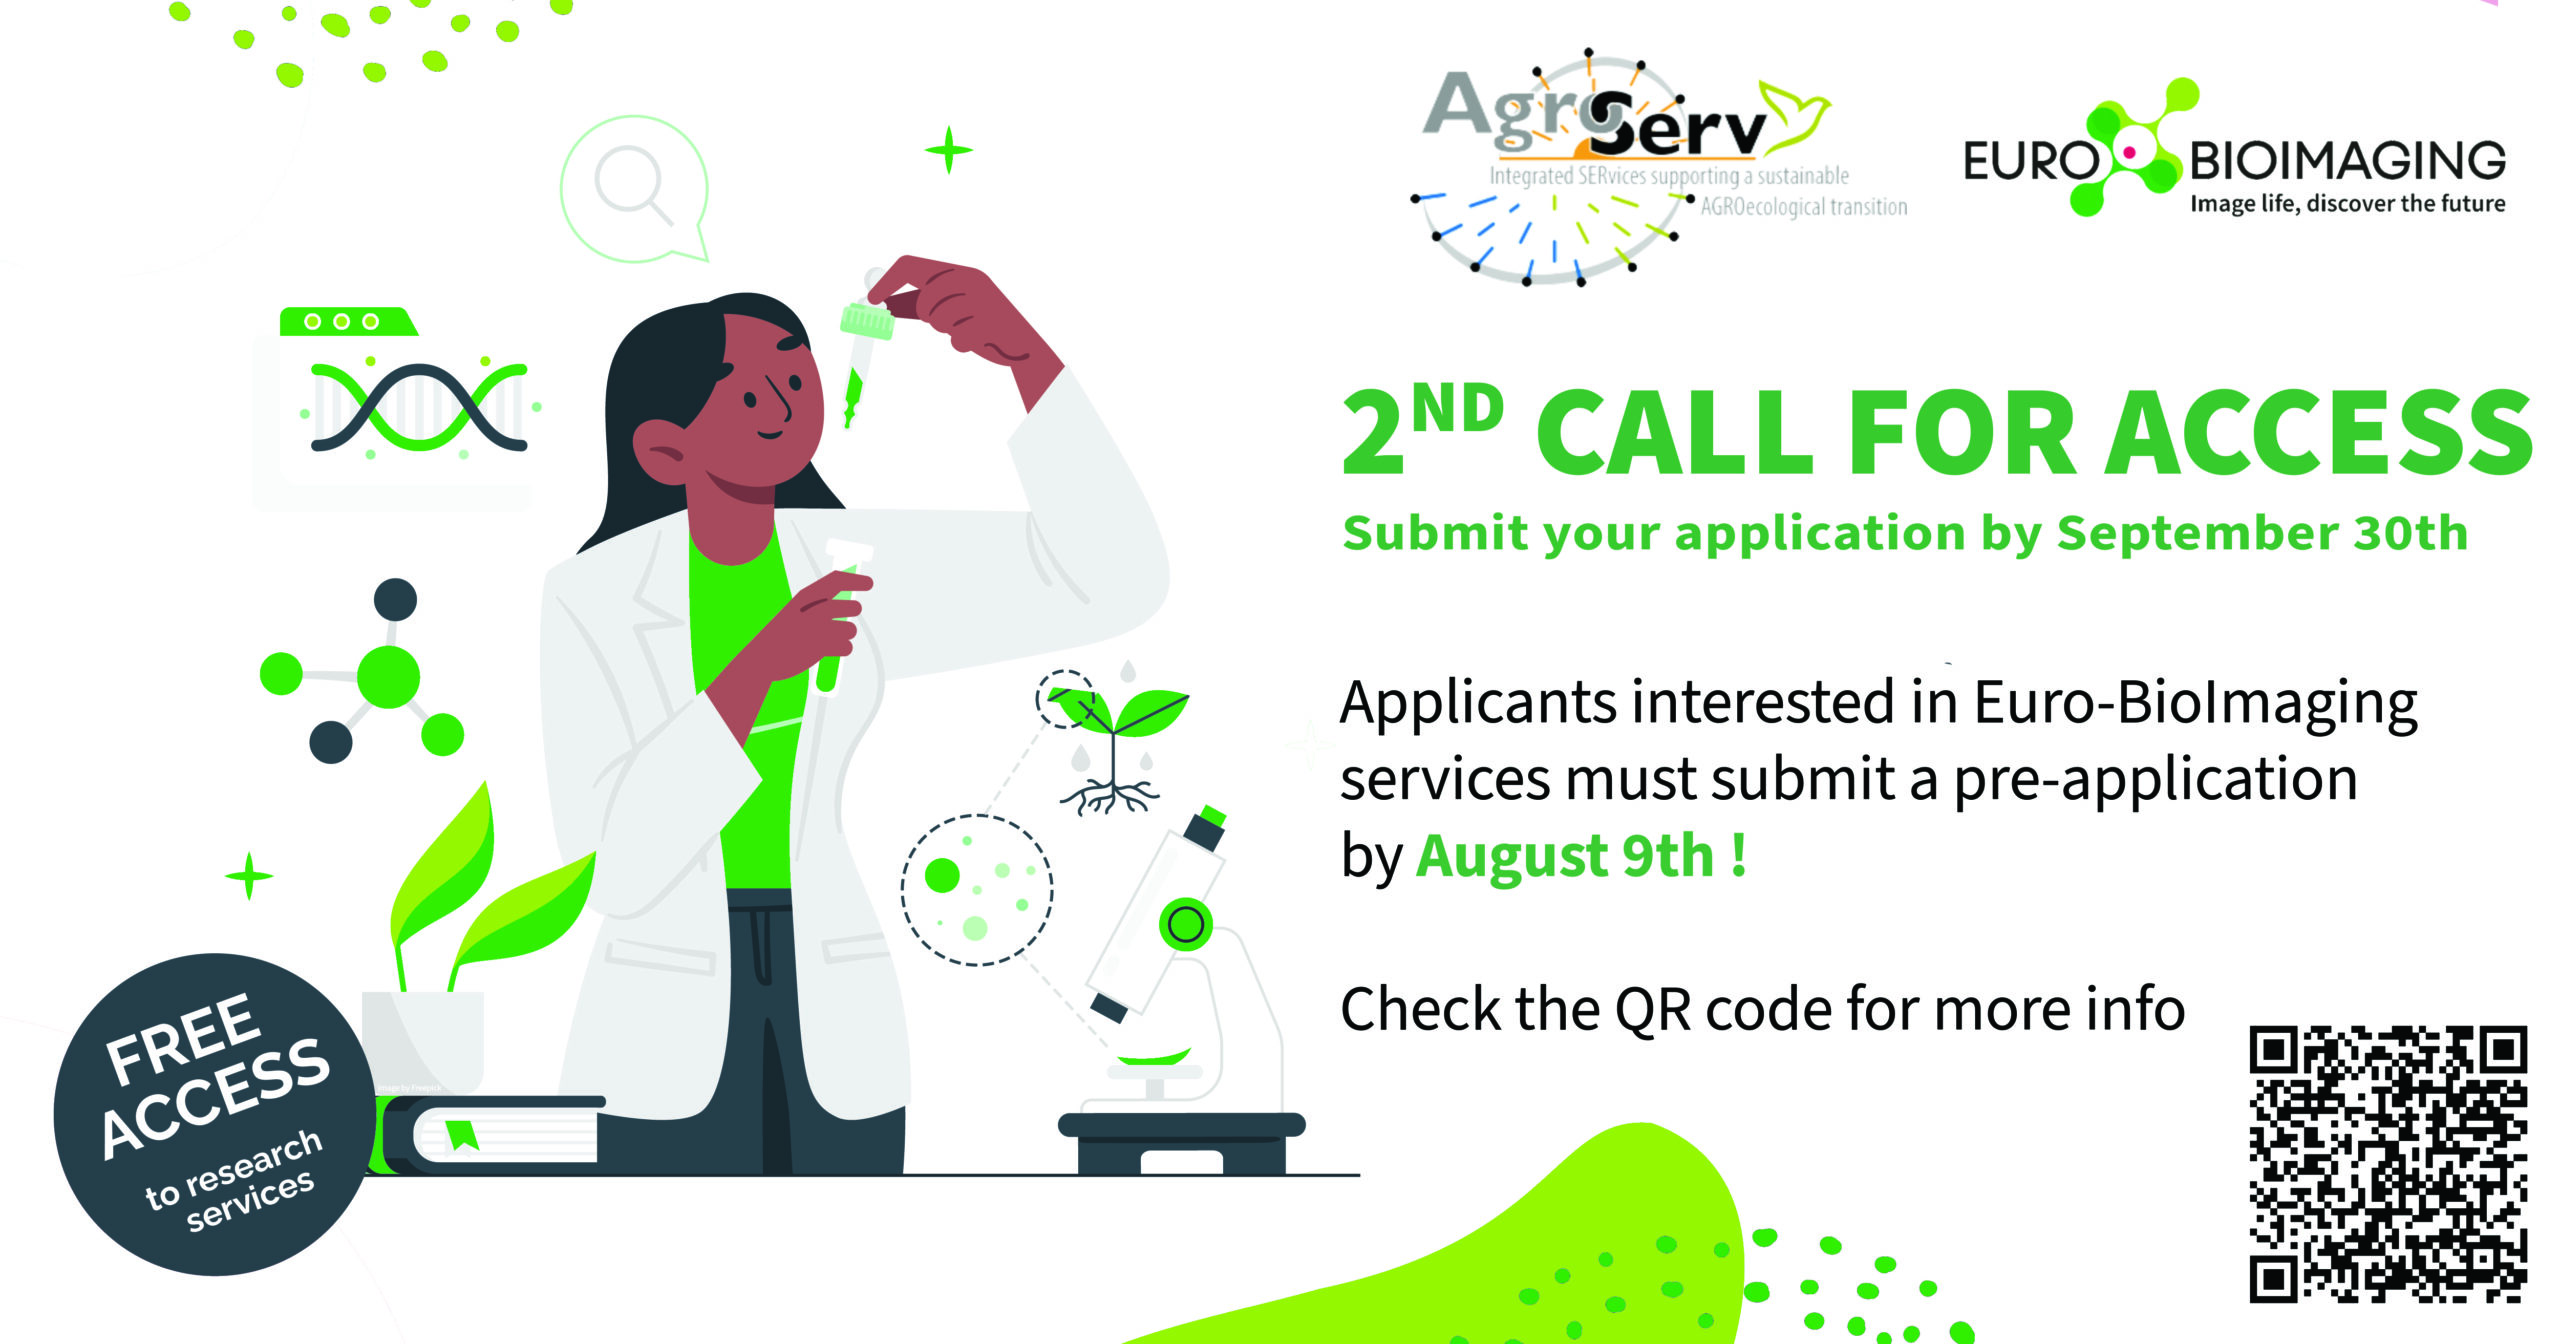 2nd AgroServ Open Call for Access